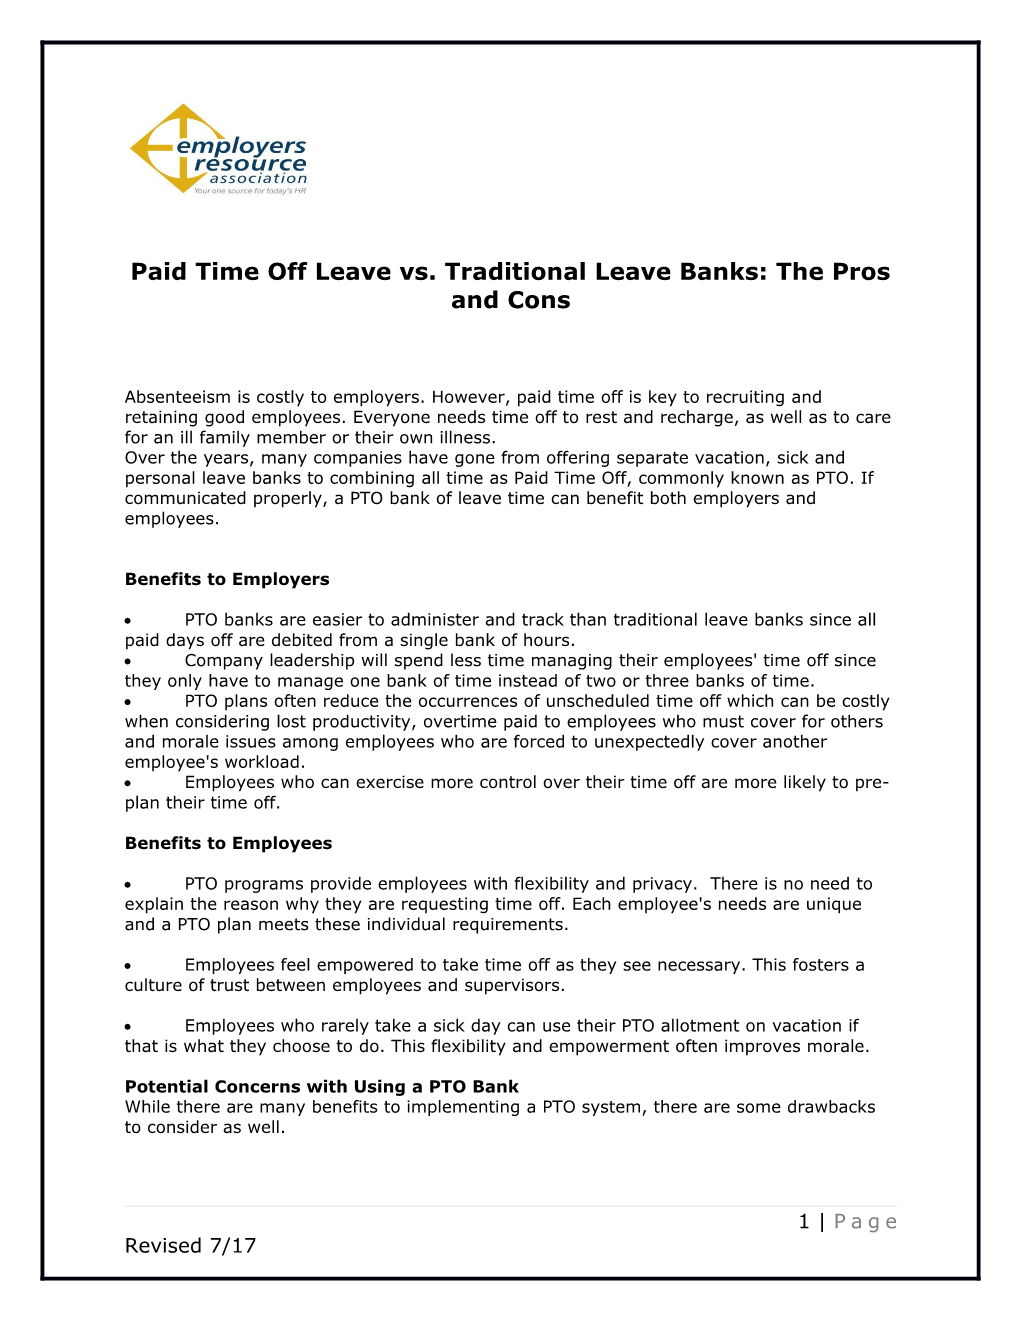 Paid Time Off Leave Vs. Traditional Leave Banks: the Pros and Cons